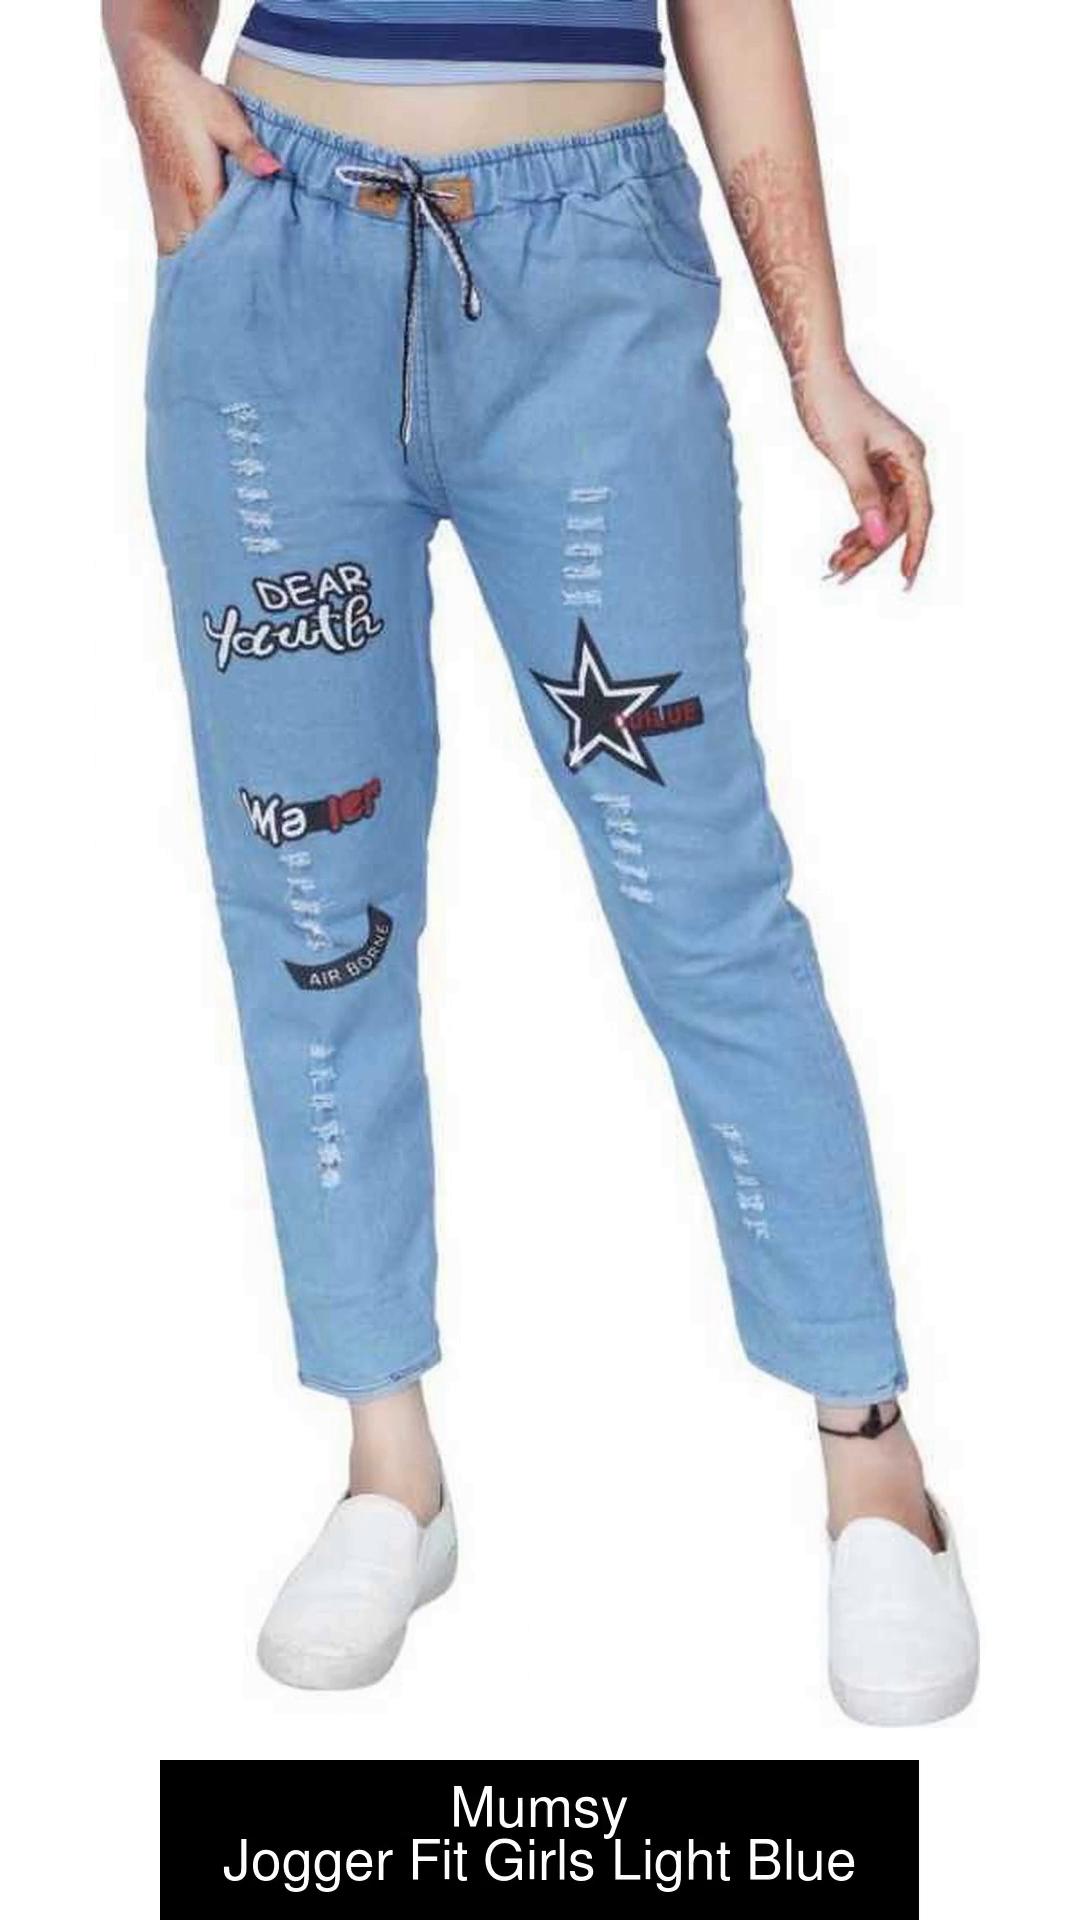 Mumsy Jogger Fit Girls Light Blue Jeans - Buy Mumsy Jogger Fit